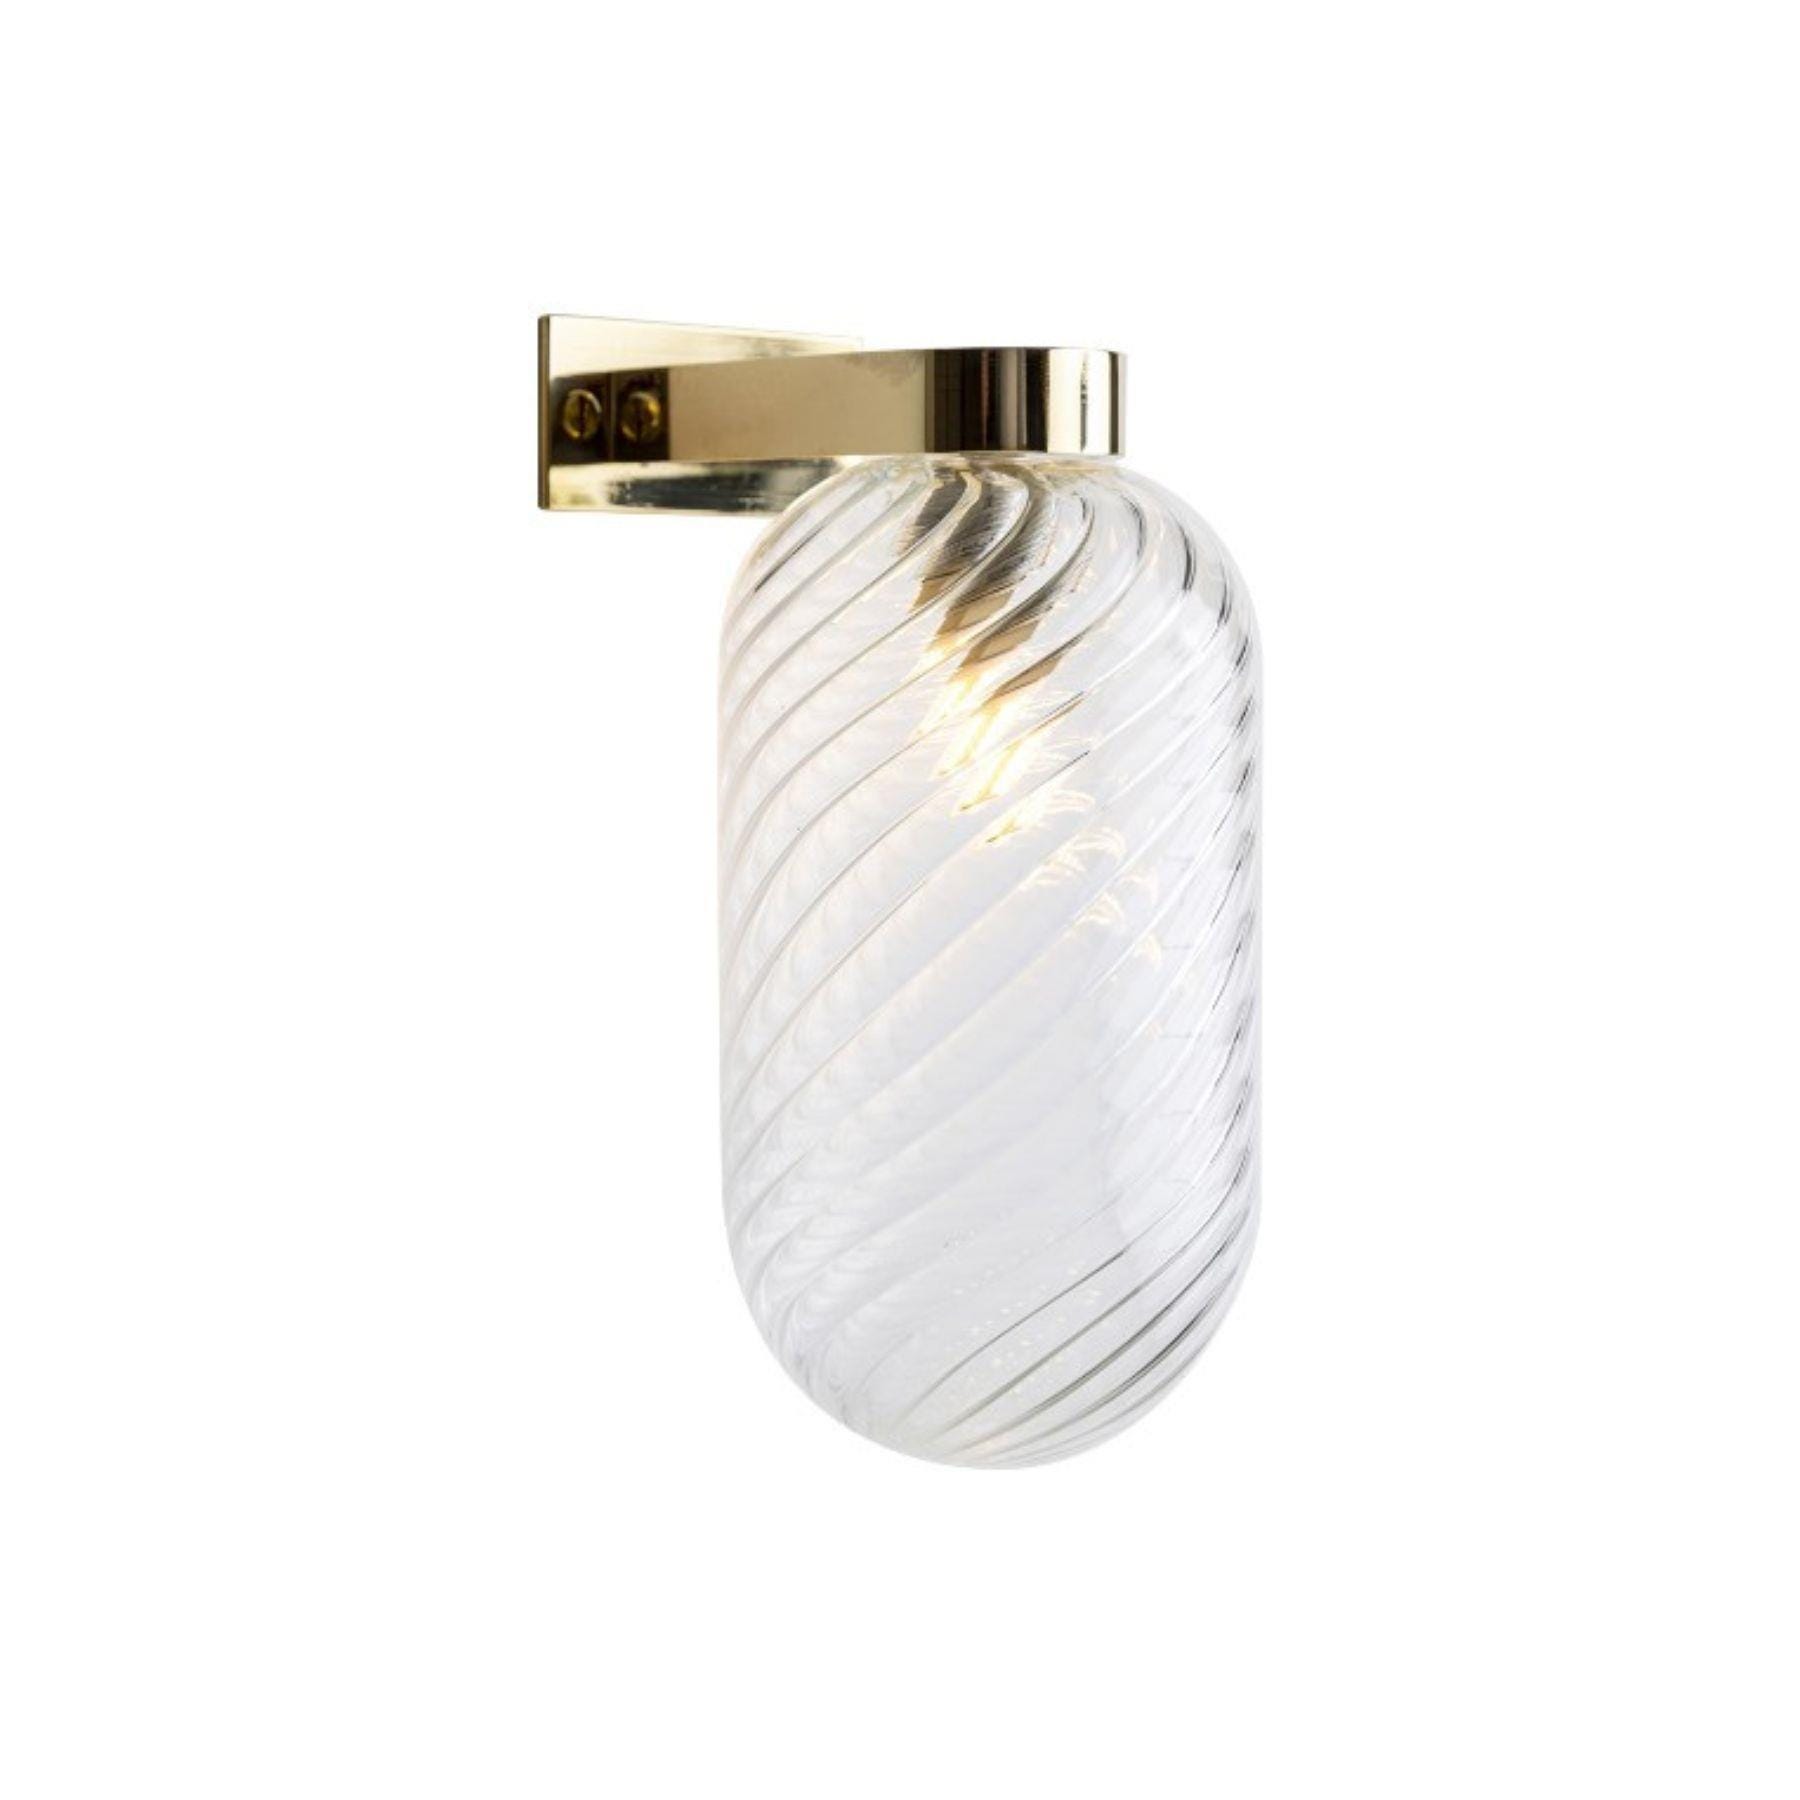 Leverint Charlton Deco Wall Light Ribbed Wall Lighting Clear